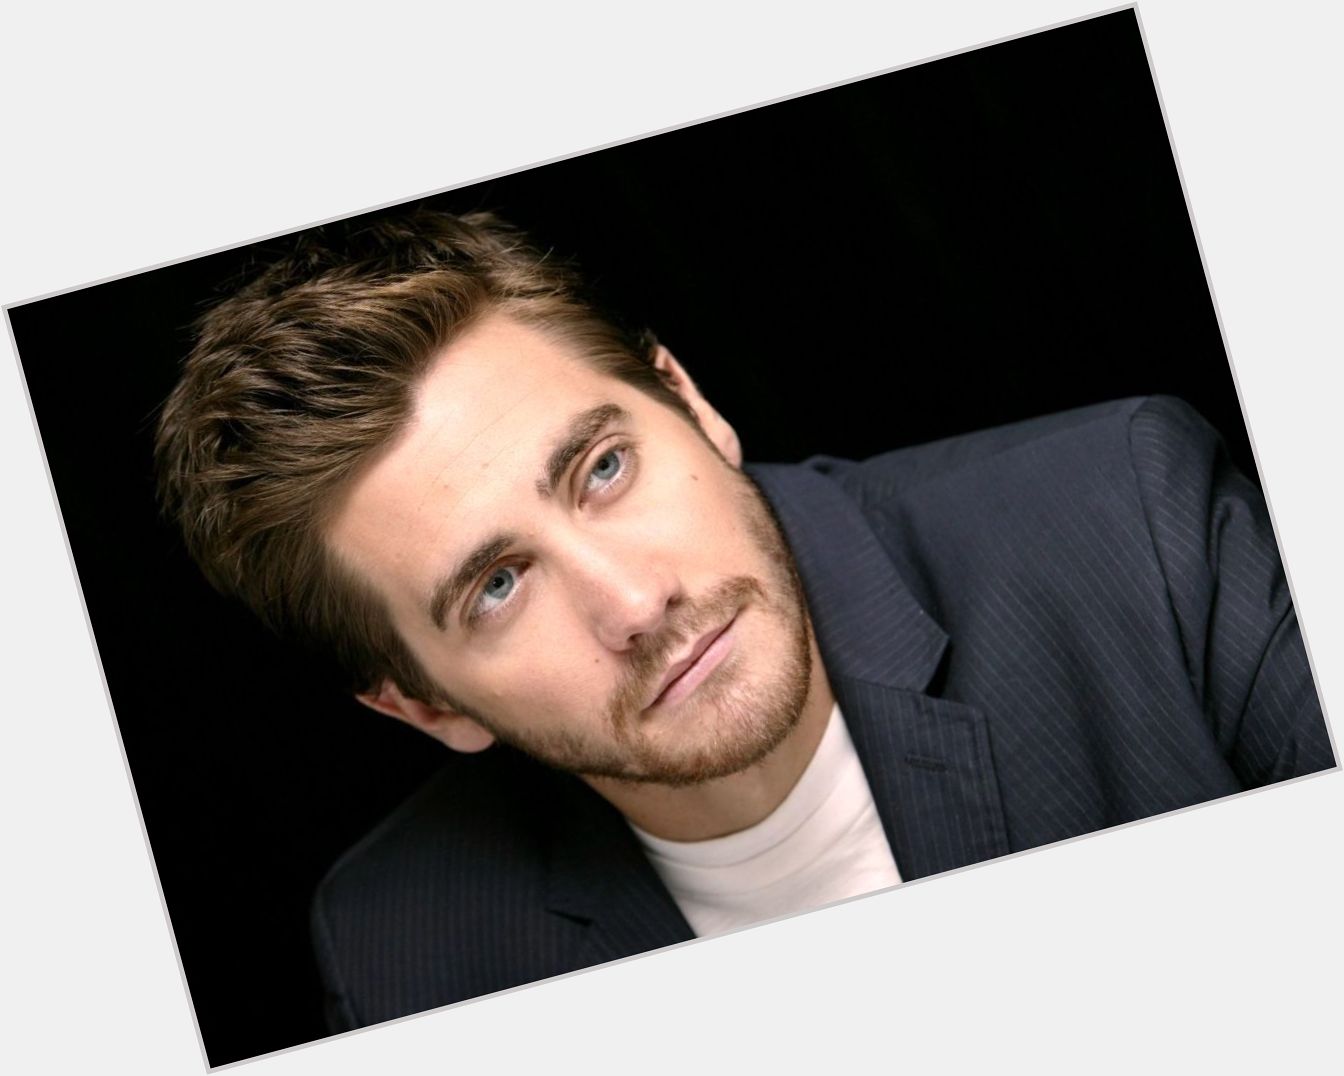 Happy Birthday to Jake Gyllenhaal! The and Actor turns 34 today! 